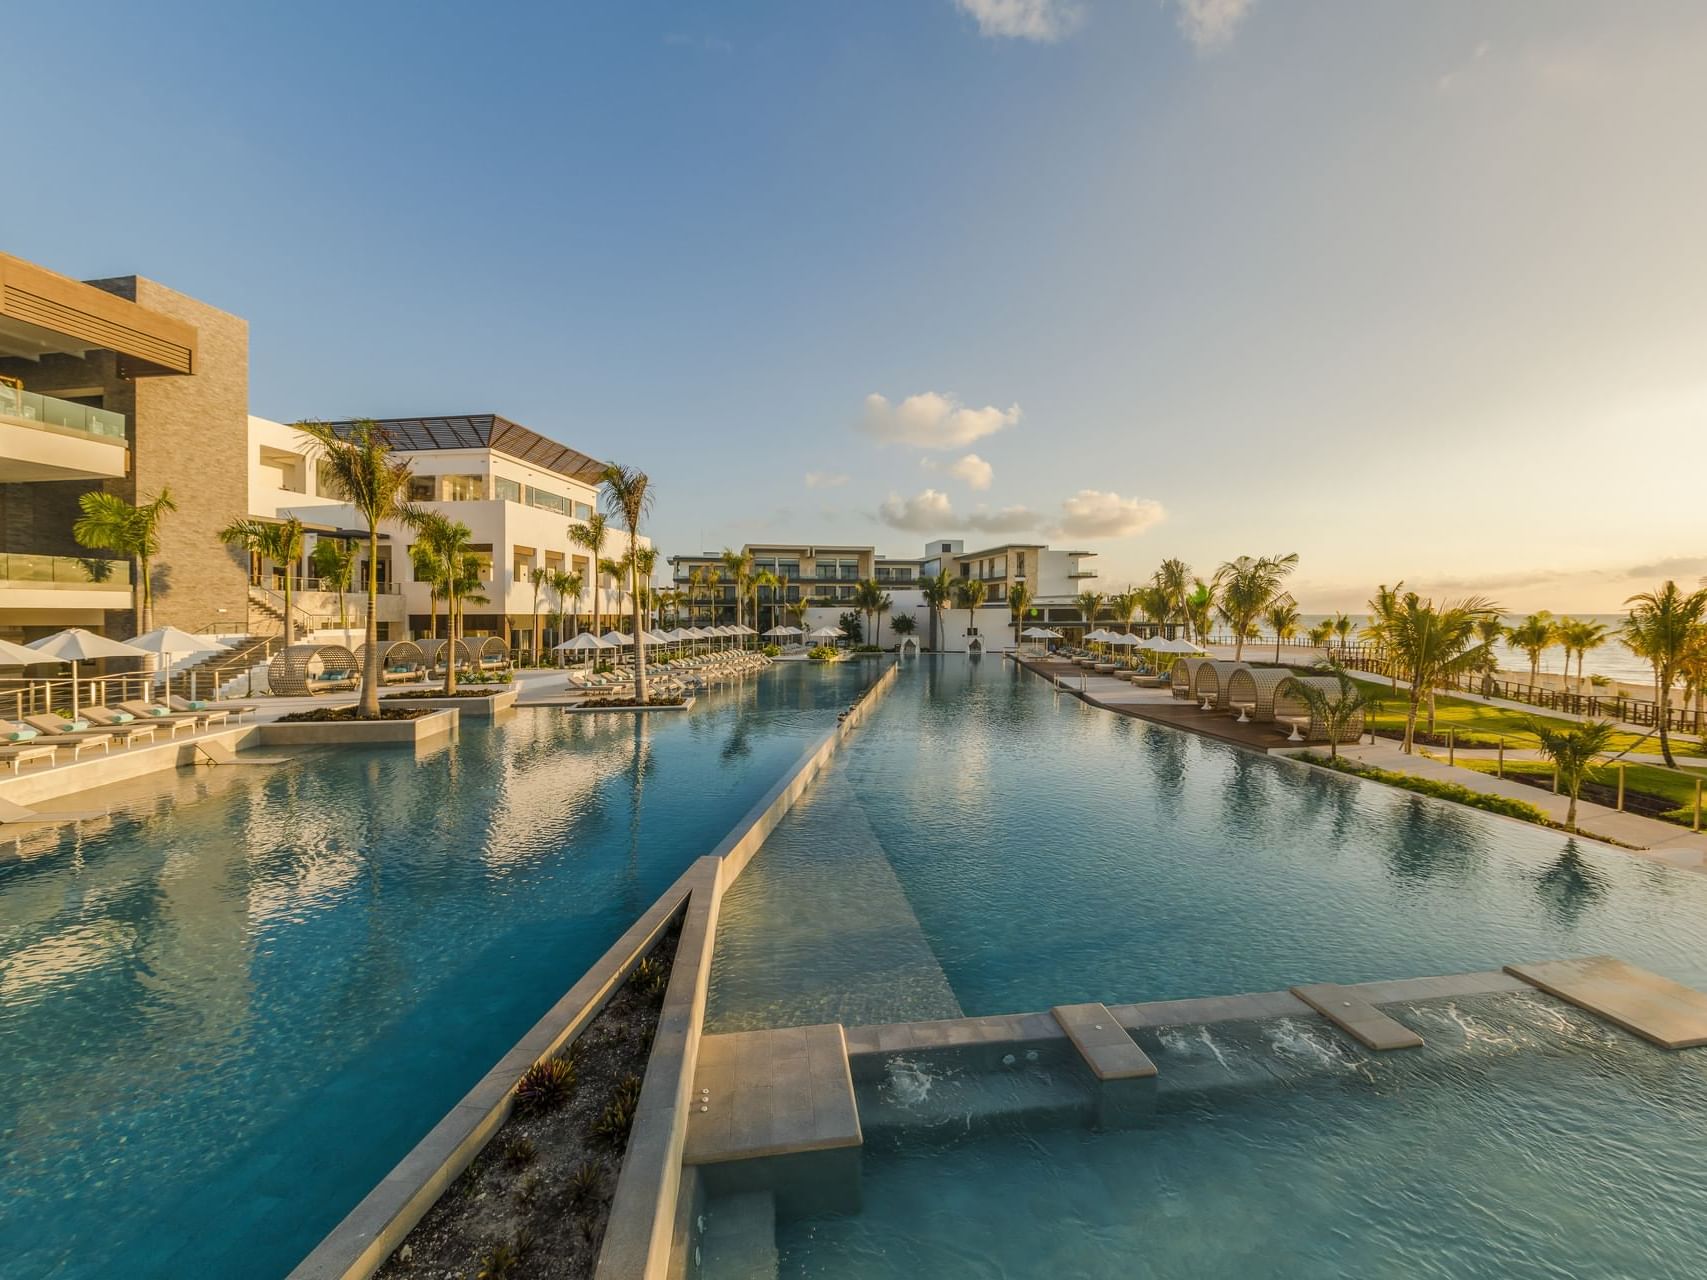 Low angle shot of the pool and hotel Haven Riviera Cancun